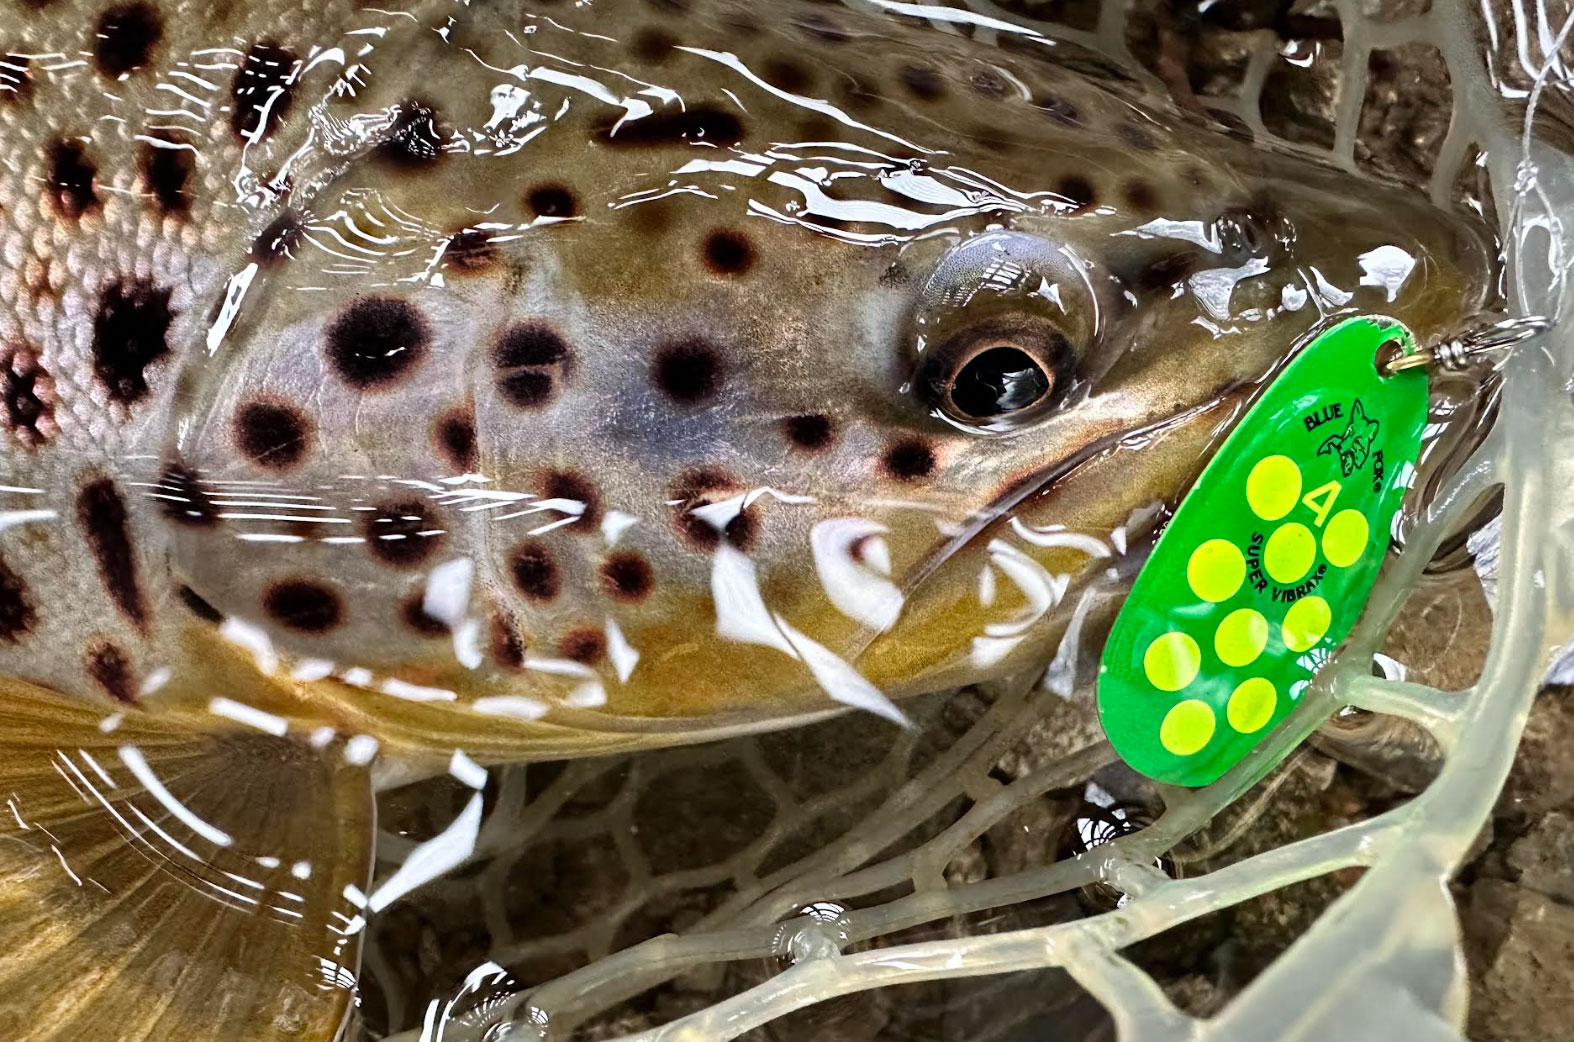 How To Fish Inline Spinners For Trout All Year Long